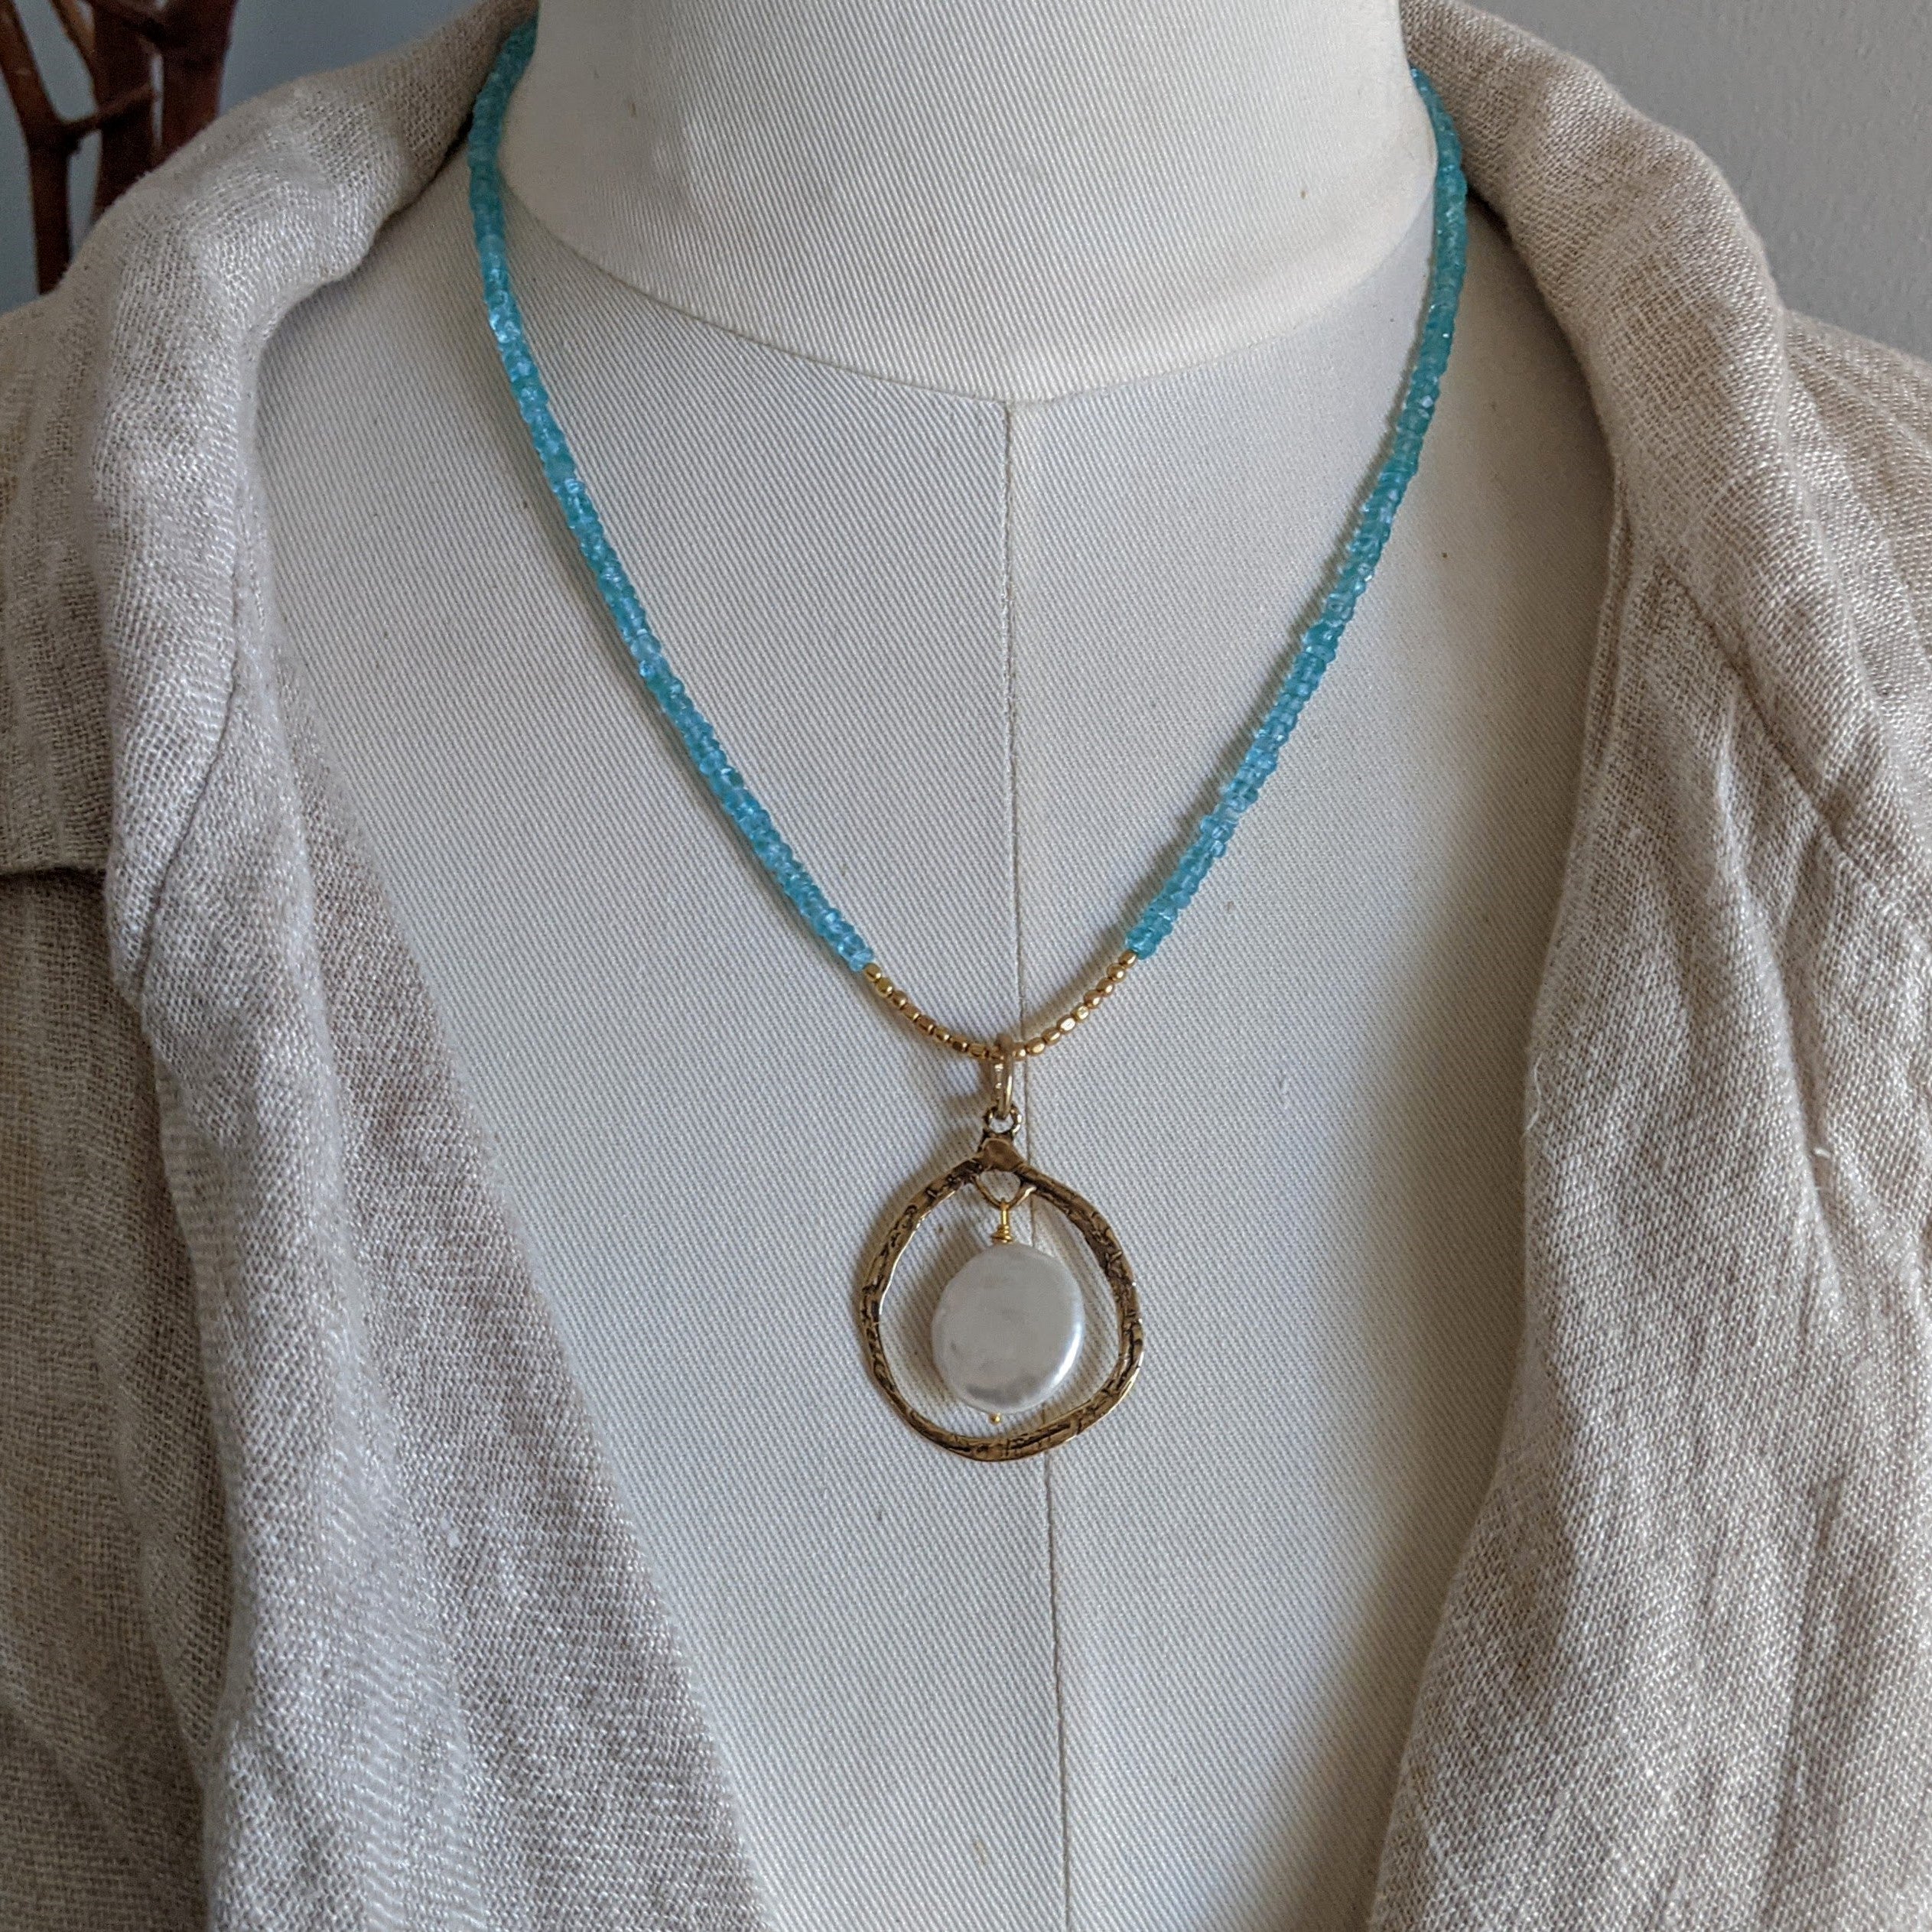 Apatite necklace. Pearl Pendant. Statement necklace. Organic jewelry. Layering necklace. Handcrafted by Aurora Creative Jewellery.